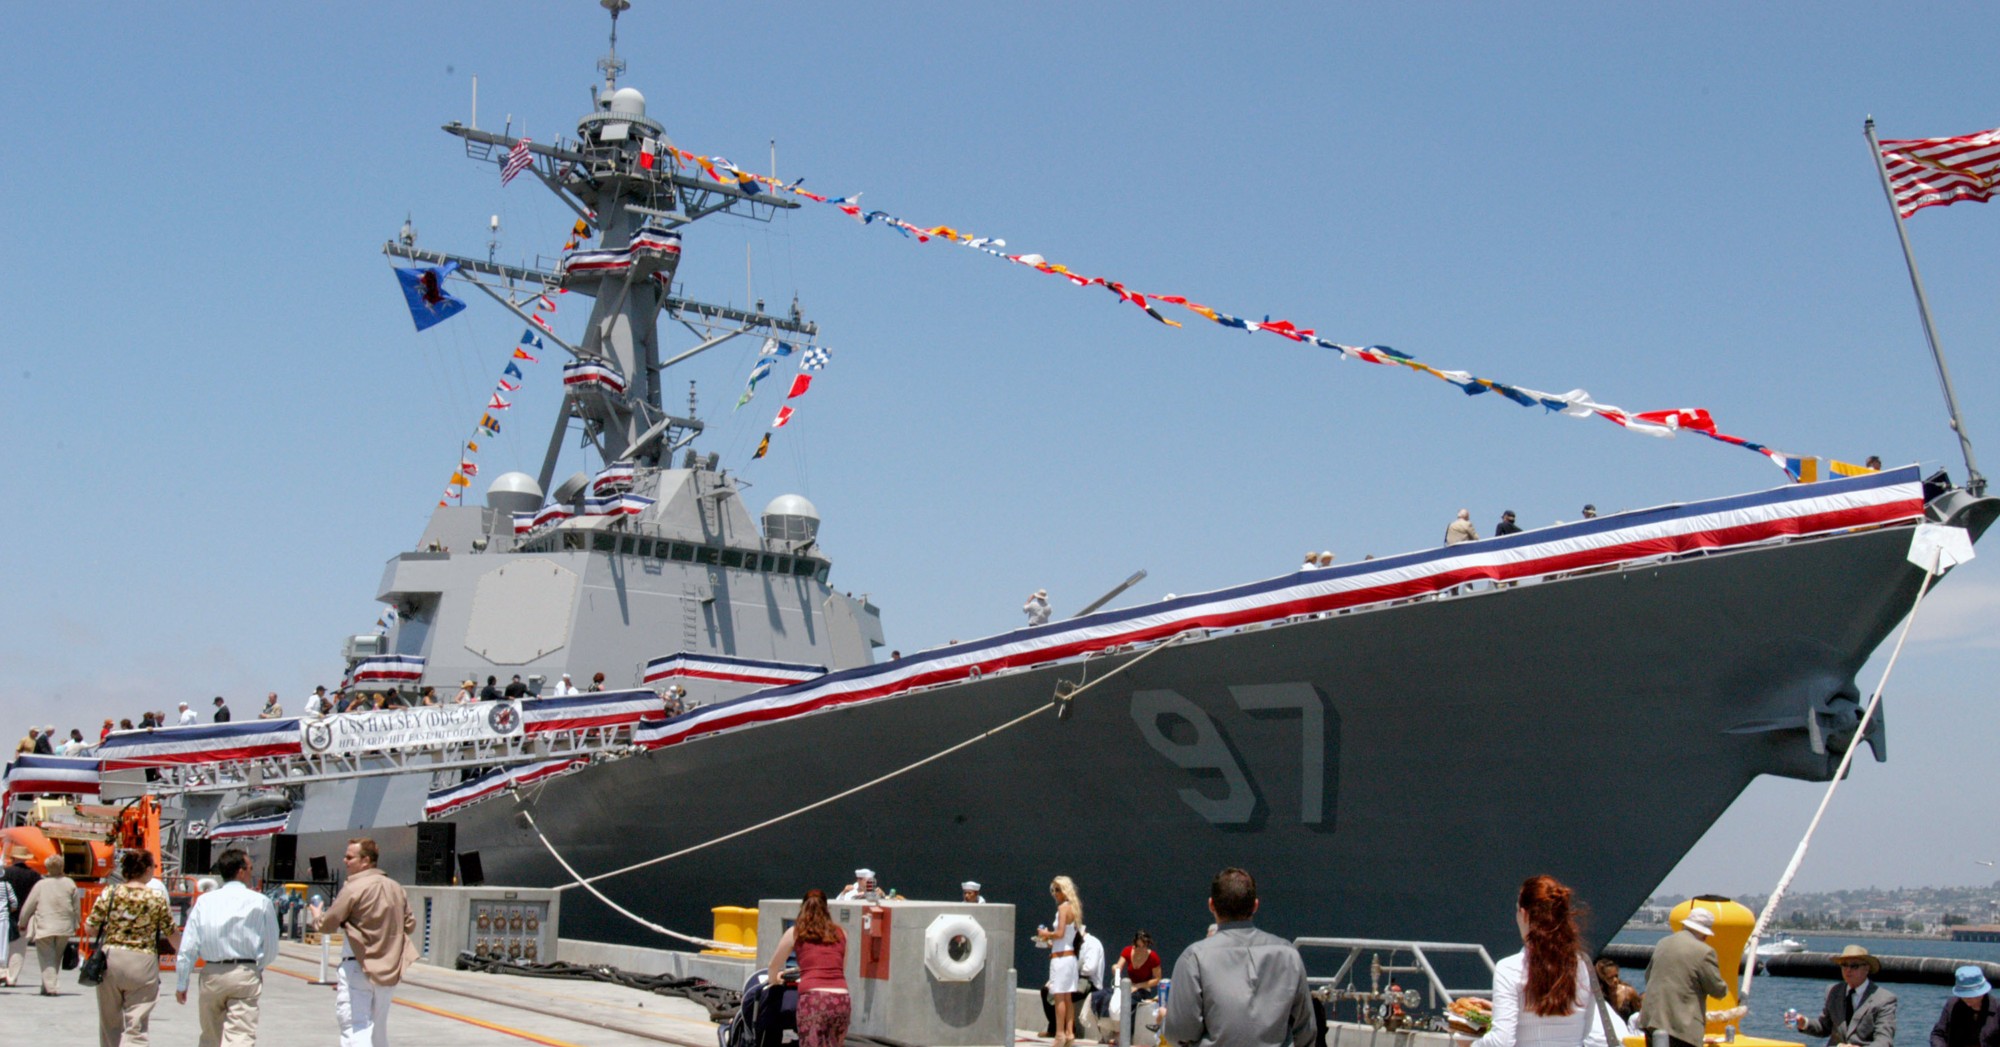 ddg-97 uss halsey arleigh burke class guided missile destroyer aegis us navy commissioning ceremony 2005 03